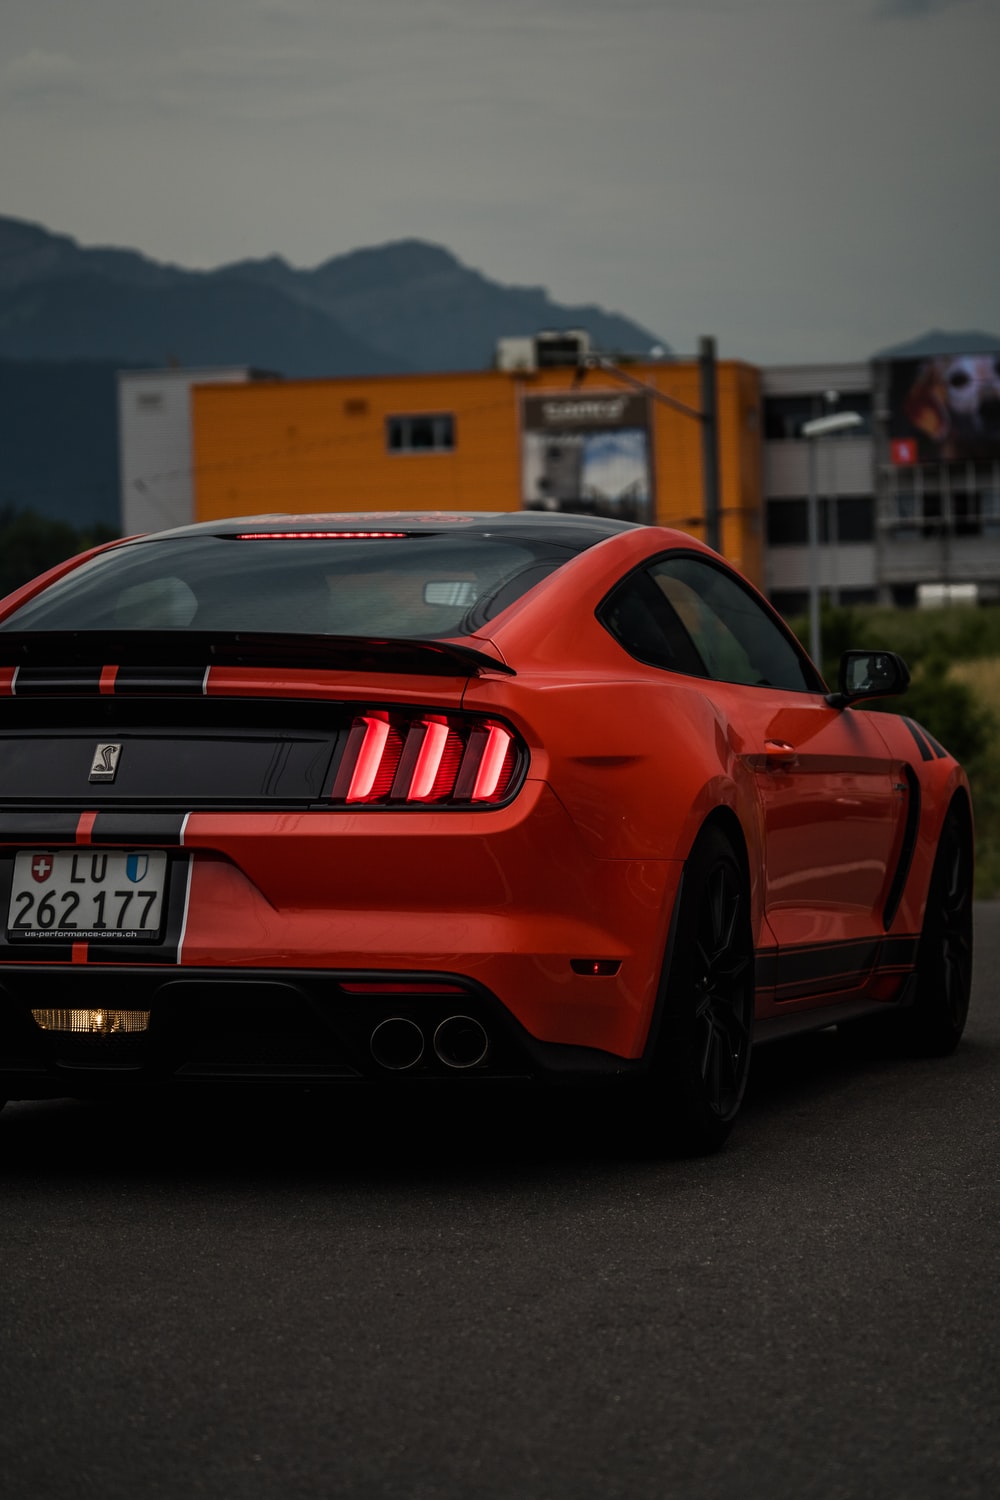 Red Mustang Wallpapers